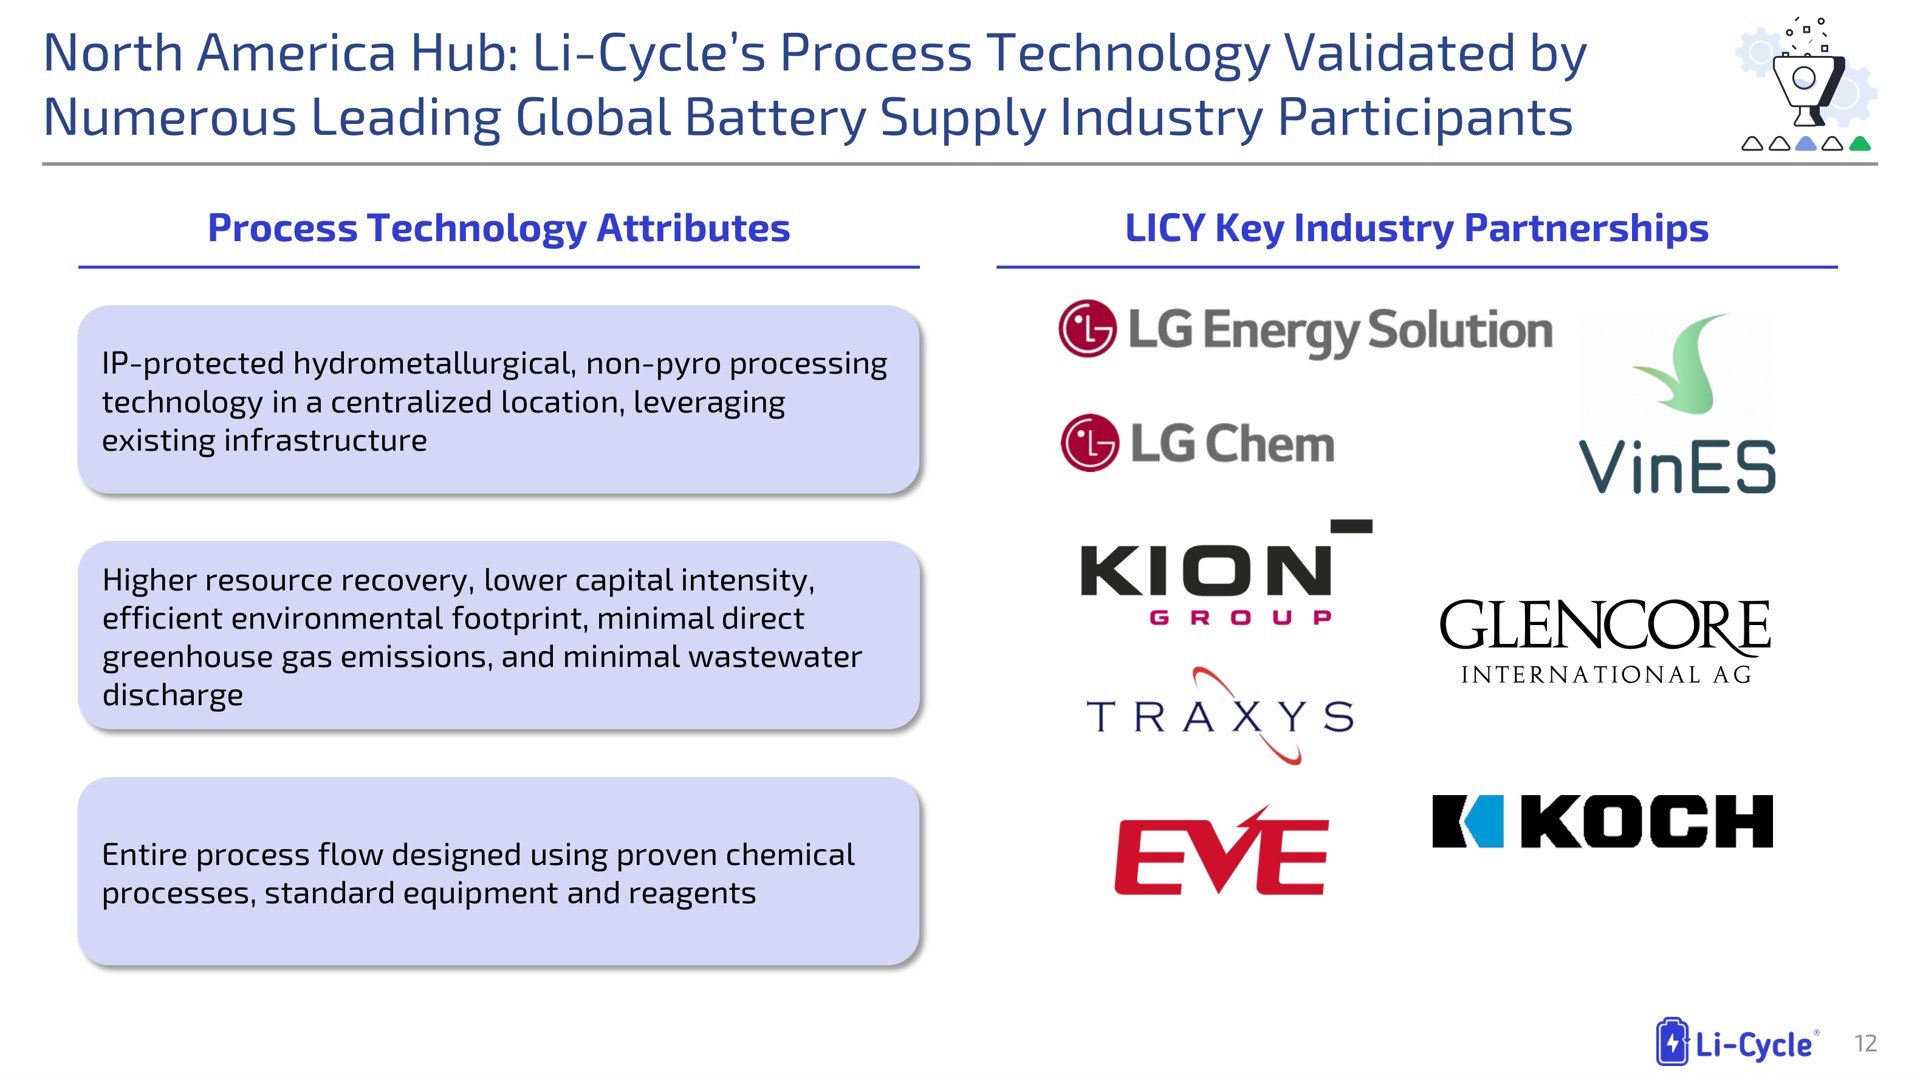 north hub cycle process technology validated by numerous leading global battery supply industry participants energy solution vines eve | Li-Cycle